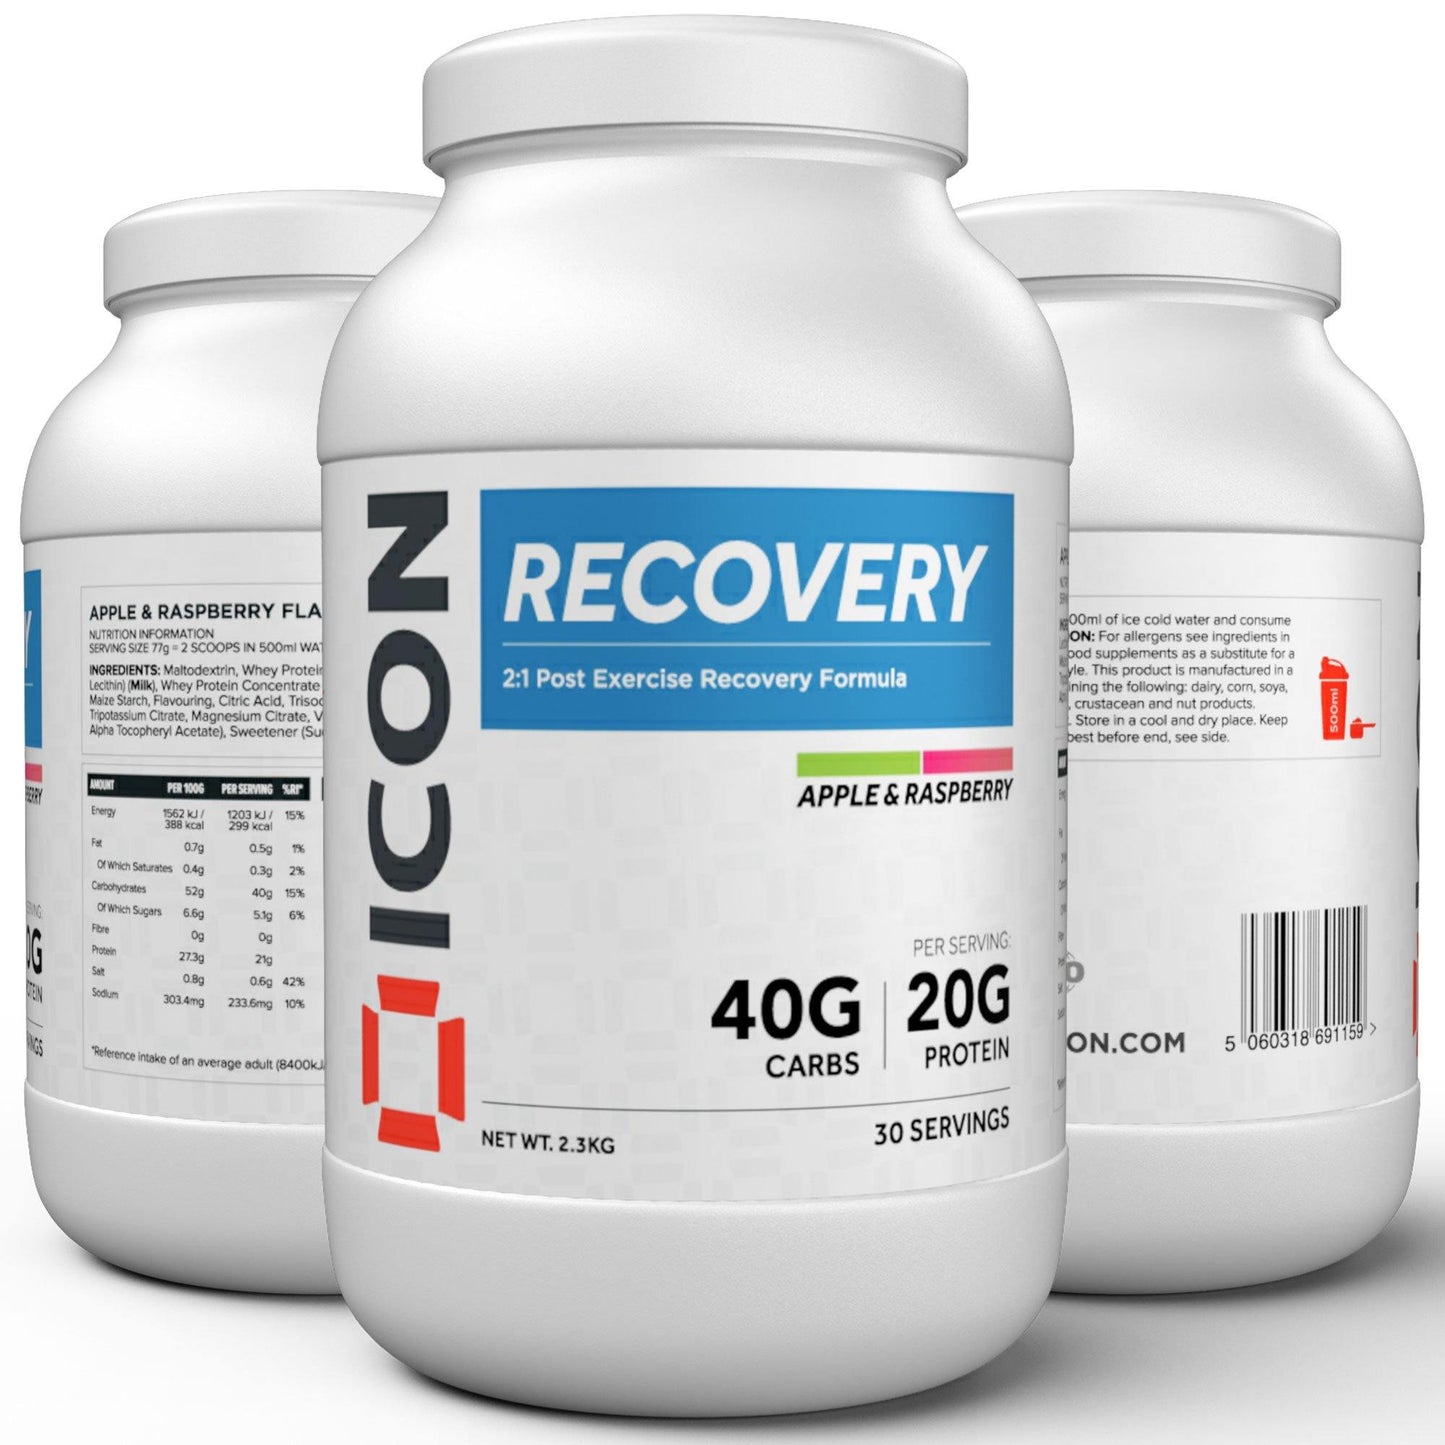 Recovery shakes and supplements